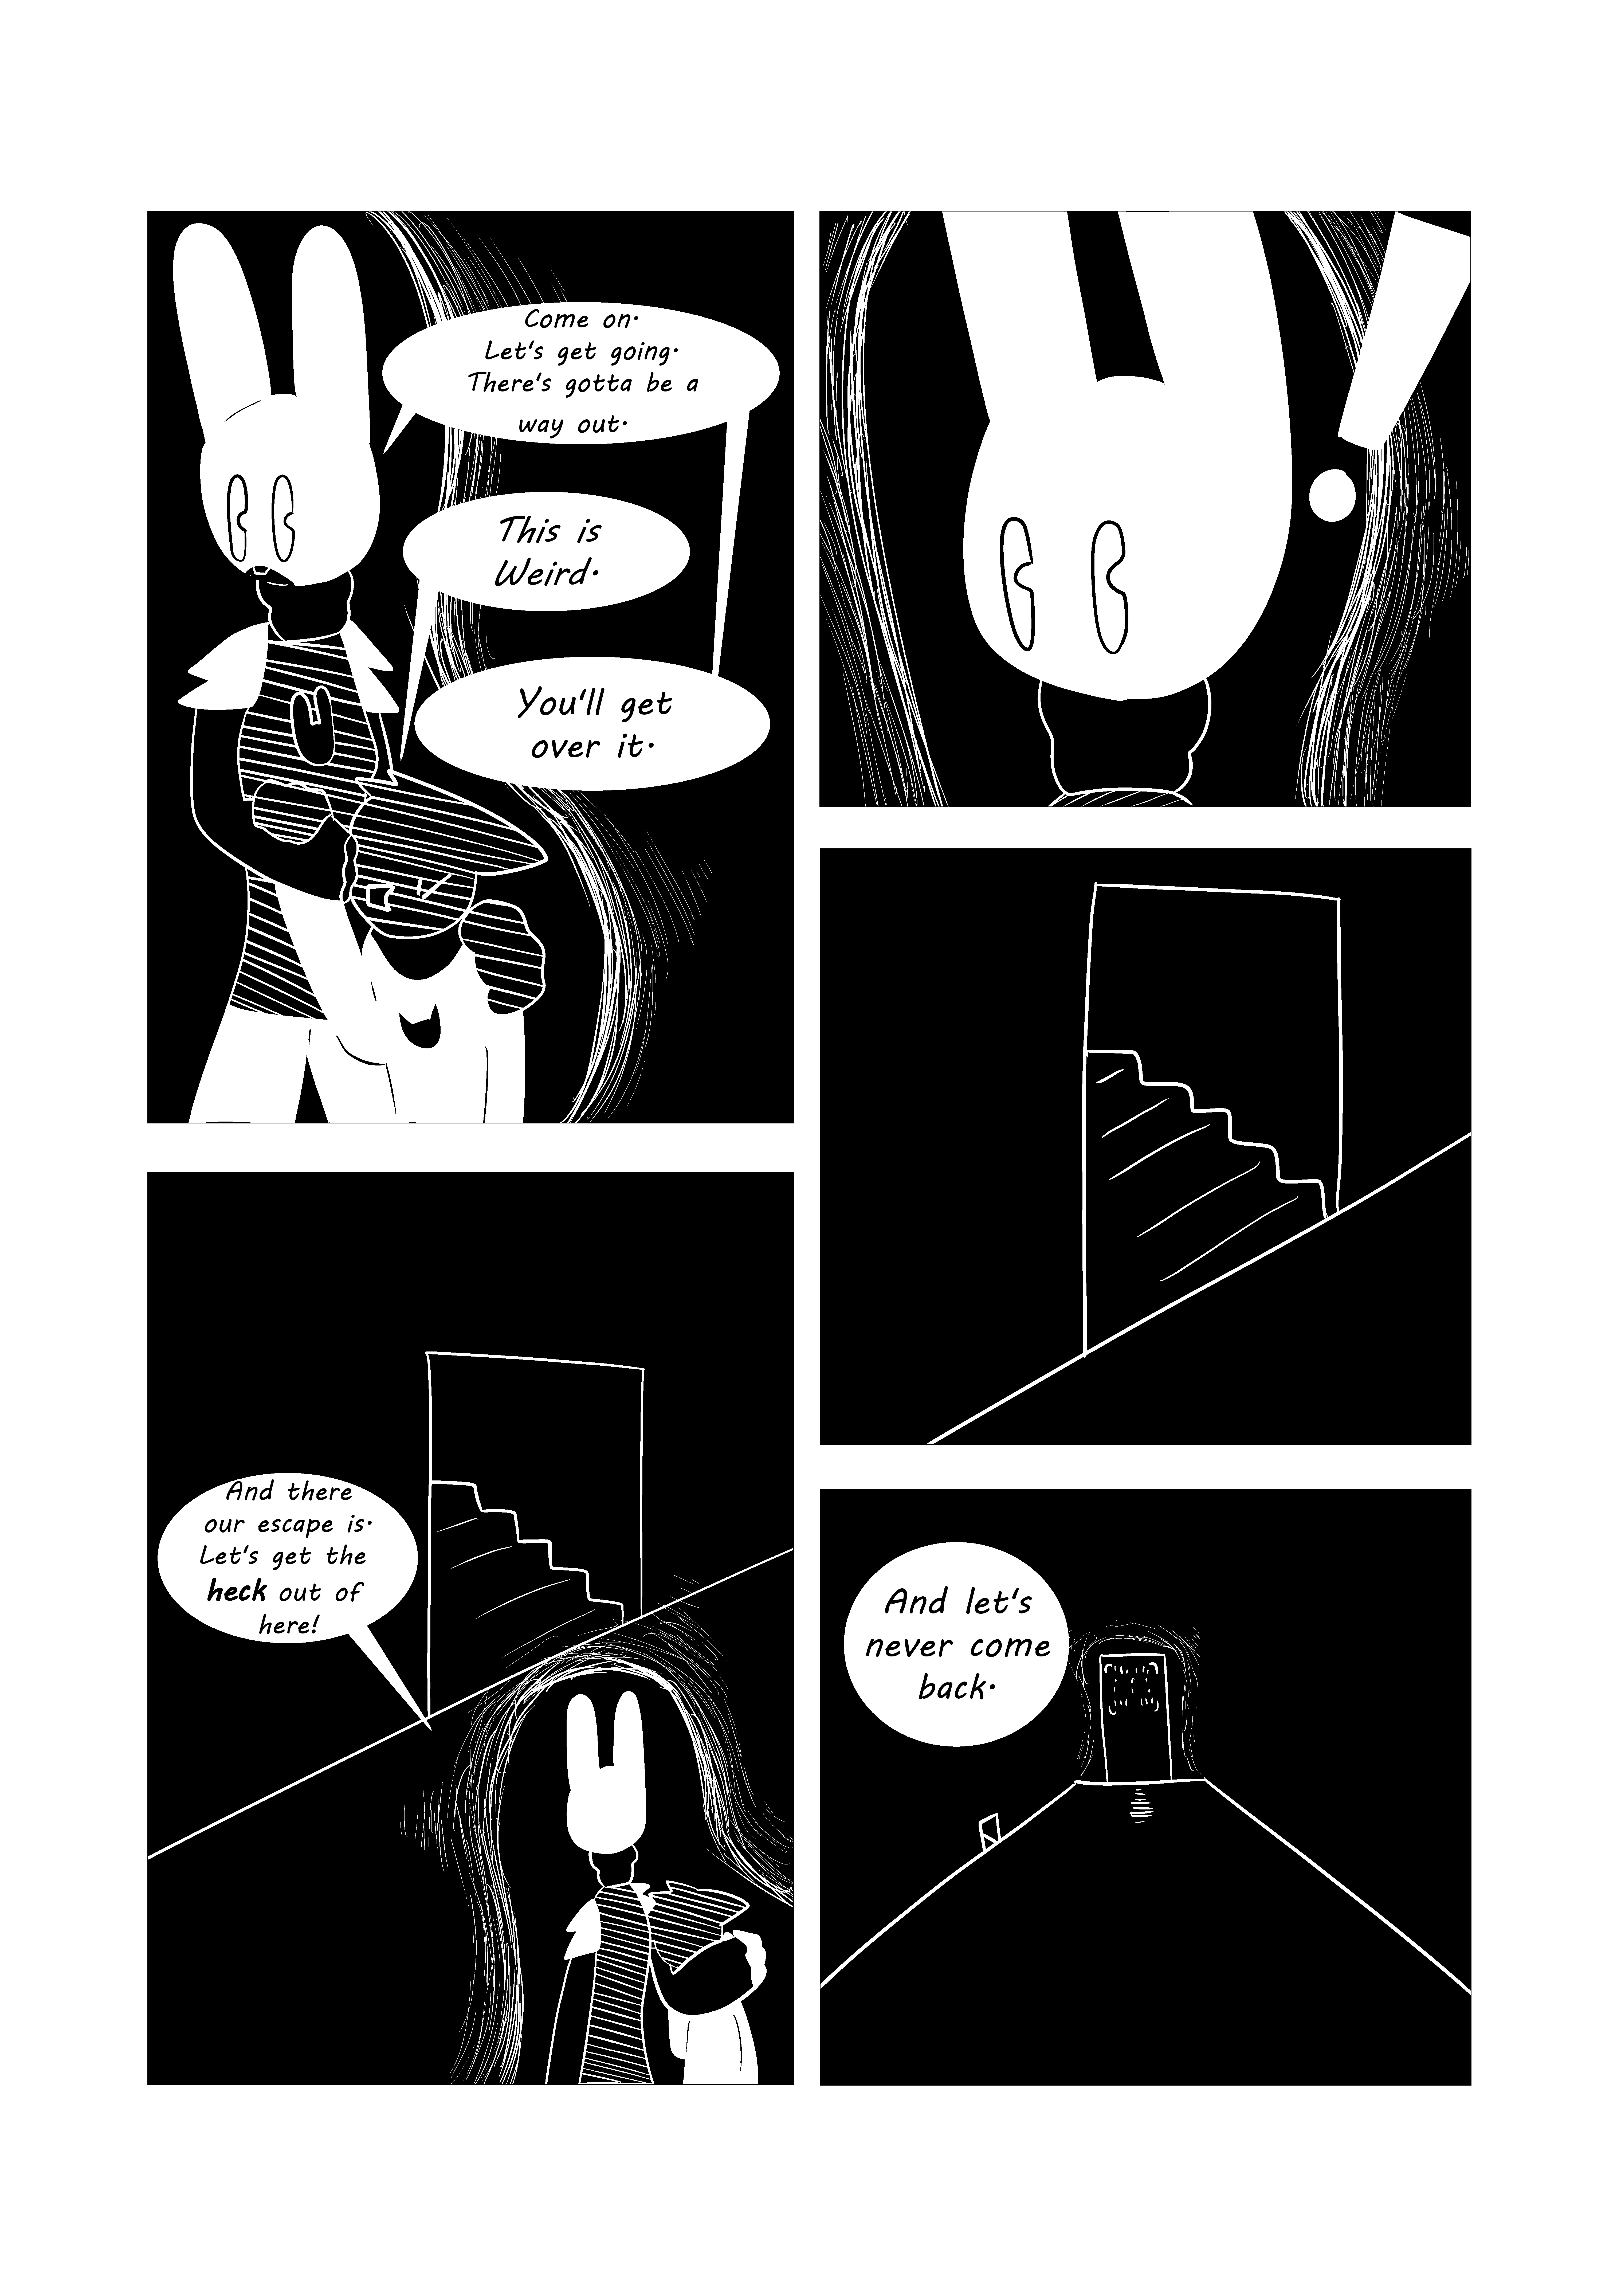 Page 66 : Let's Not Come Back